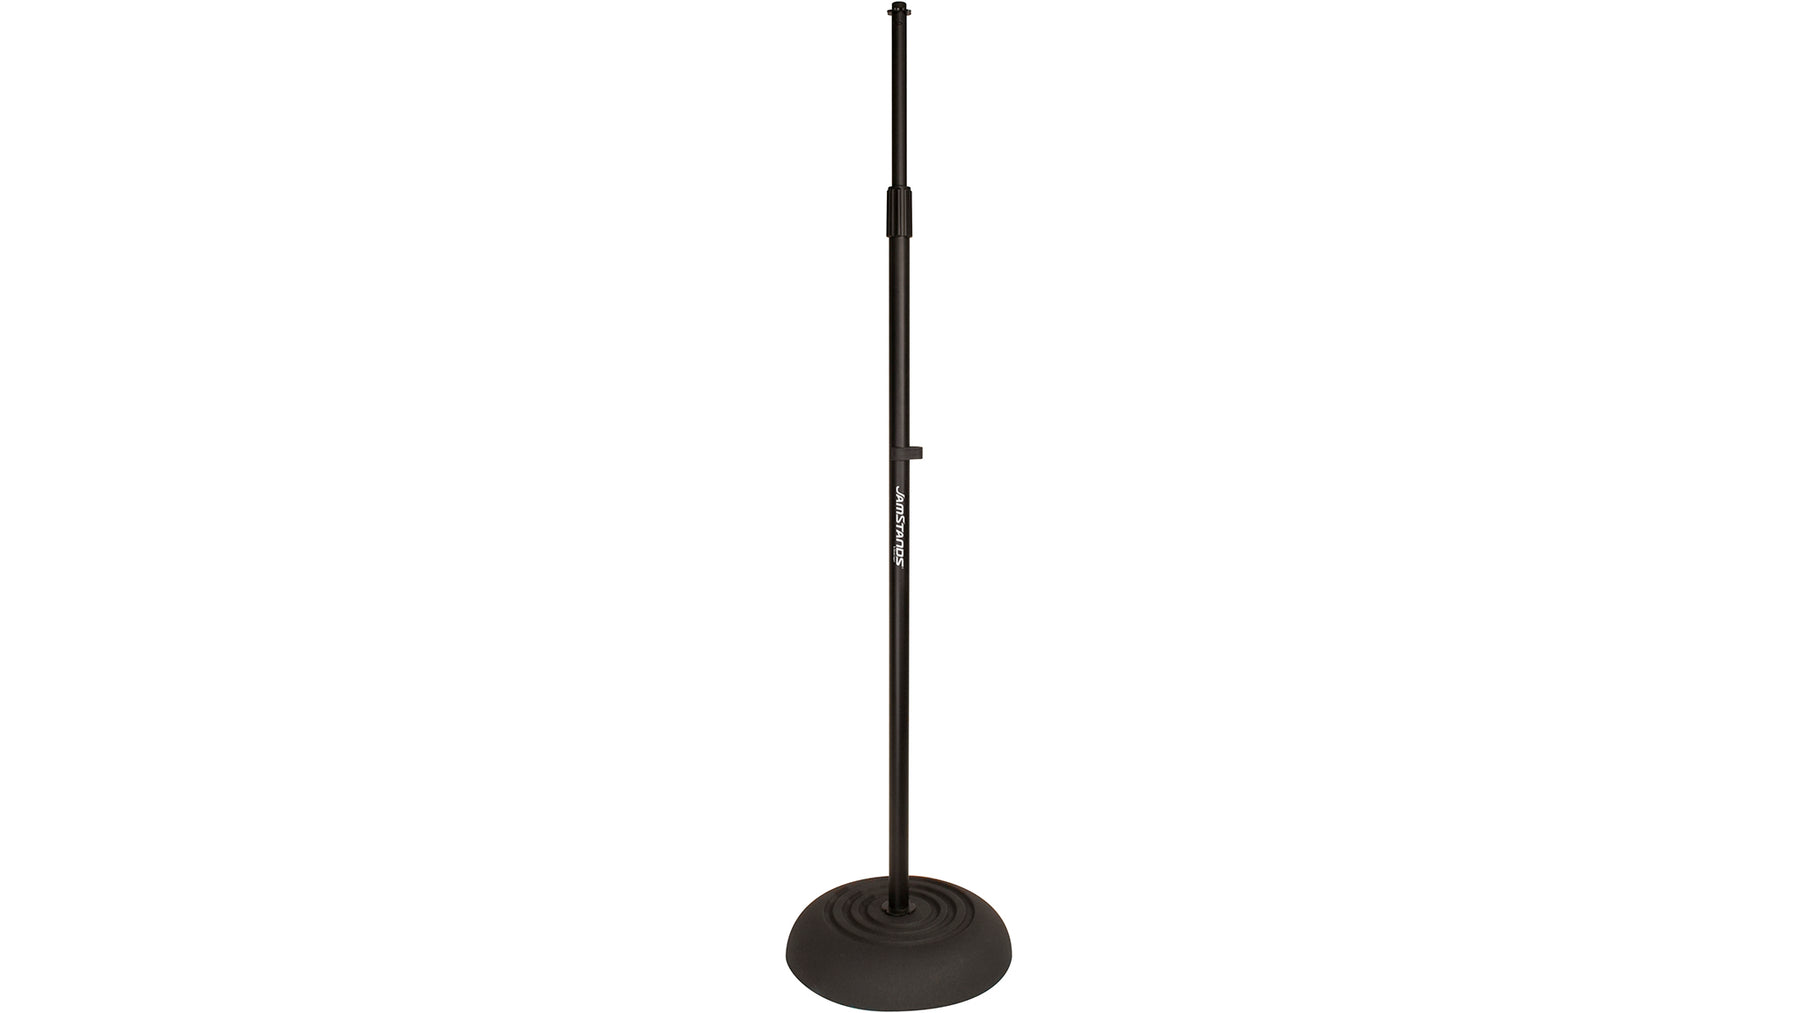 JS-MCRB100 Round Based Mic Stand